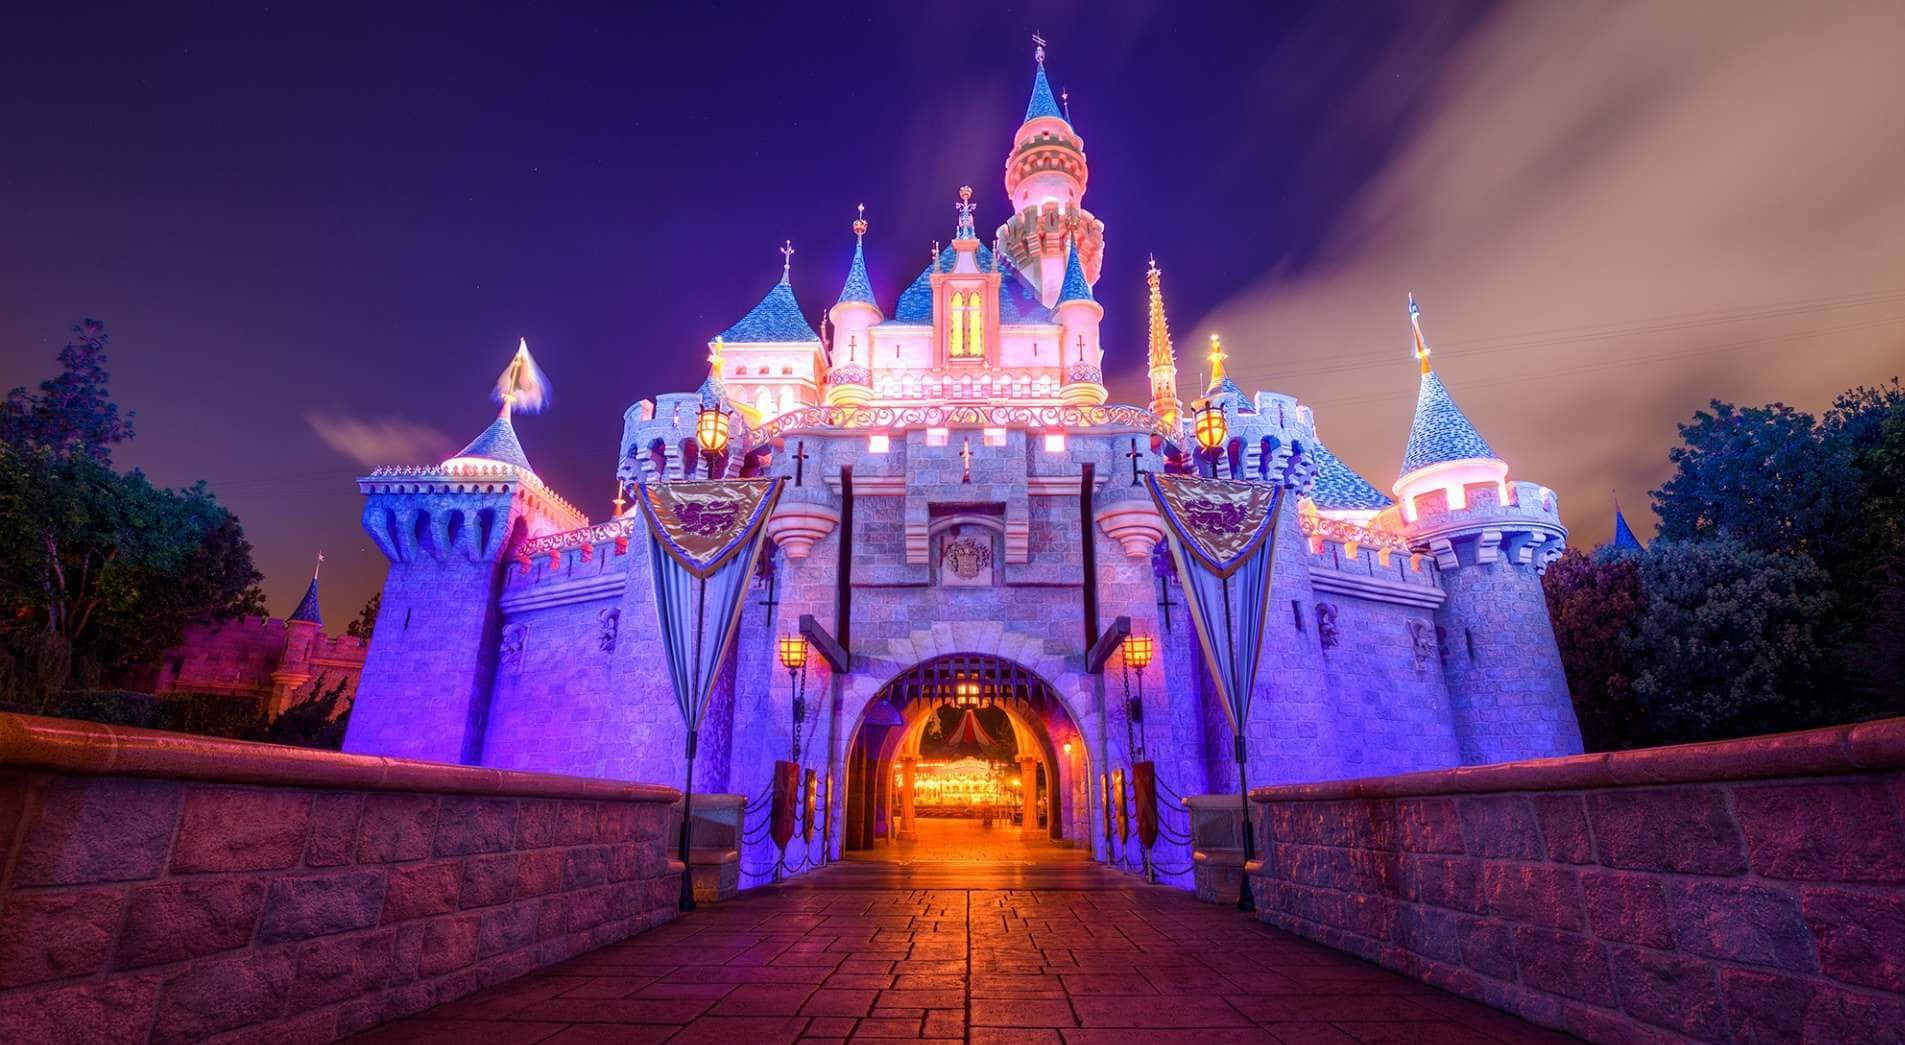 Travel to a world of dreams and imagination at Disney Castle